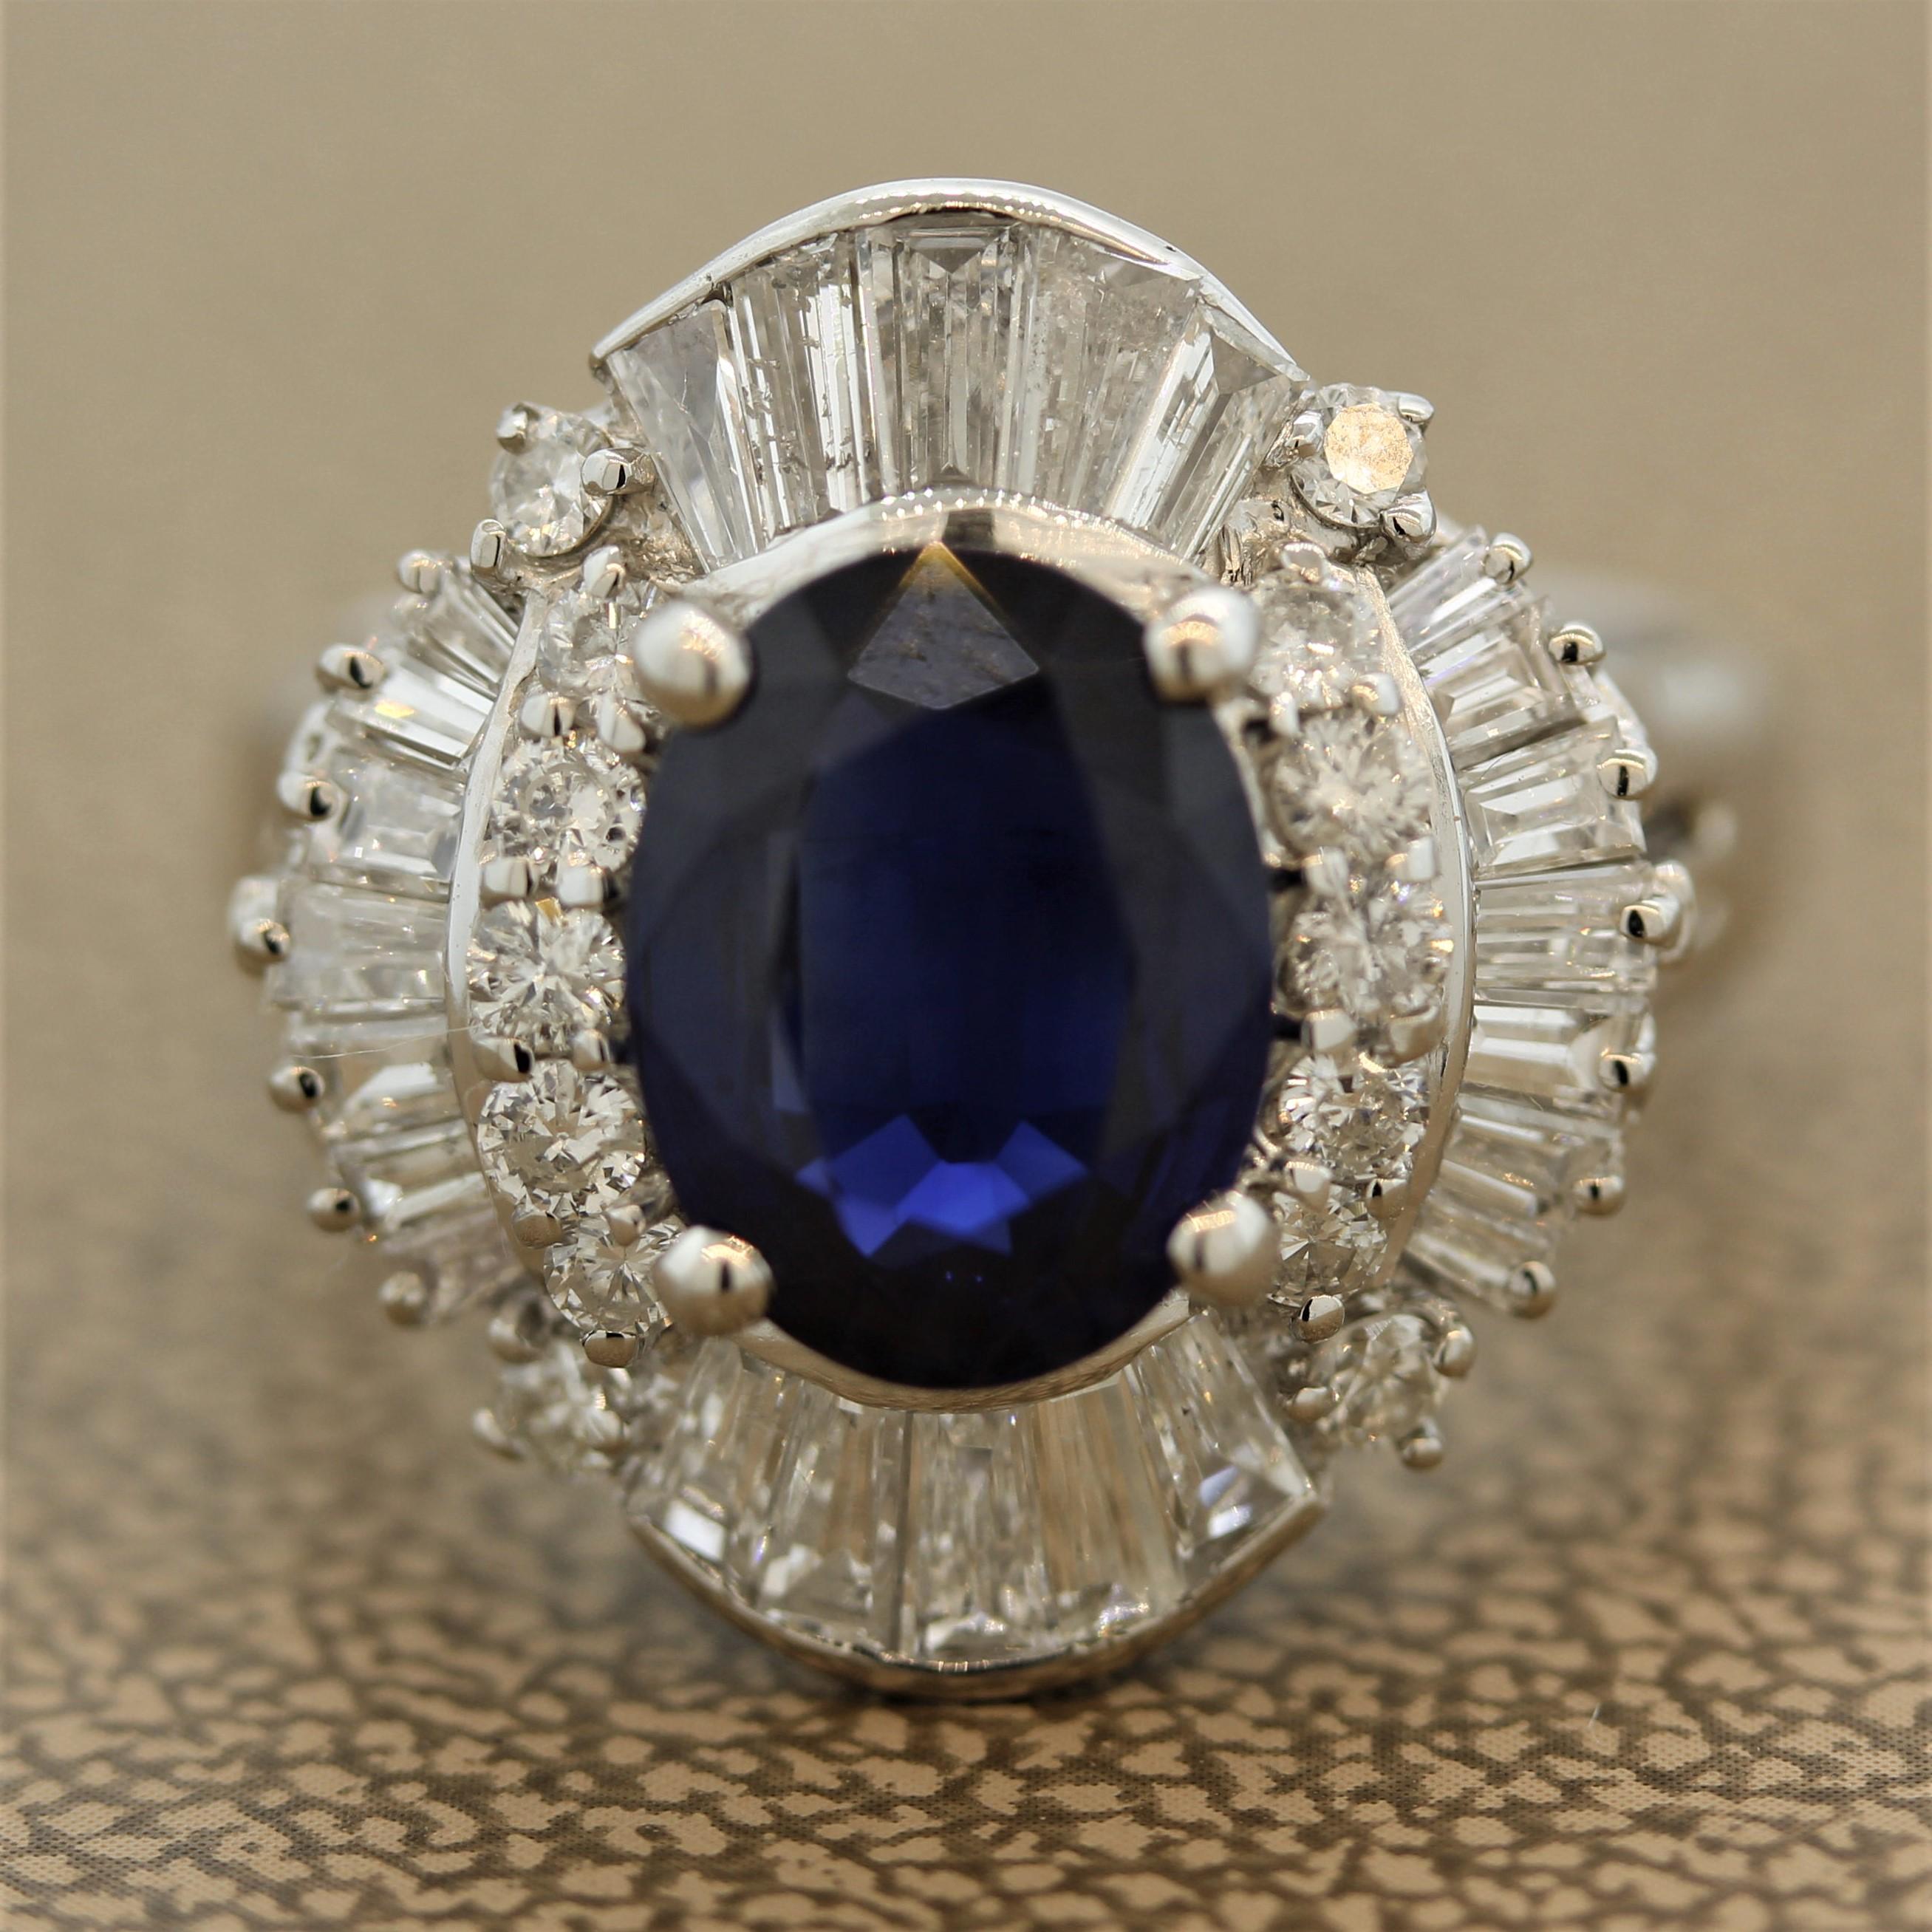 A classic sapphire and diamond cocktail ring. The oval shaped sapphire weighs 3.30 carats and has a rich even blue color. It is surrounded by a cluster of round brilliant and tapered baguette cut diamonds which weigh a total of 1.48 carats. Hand